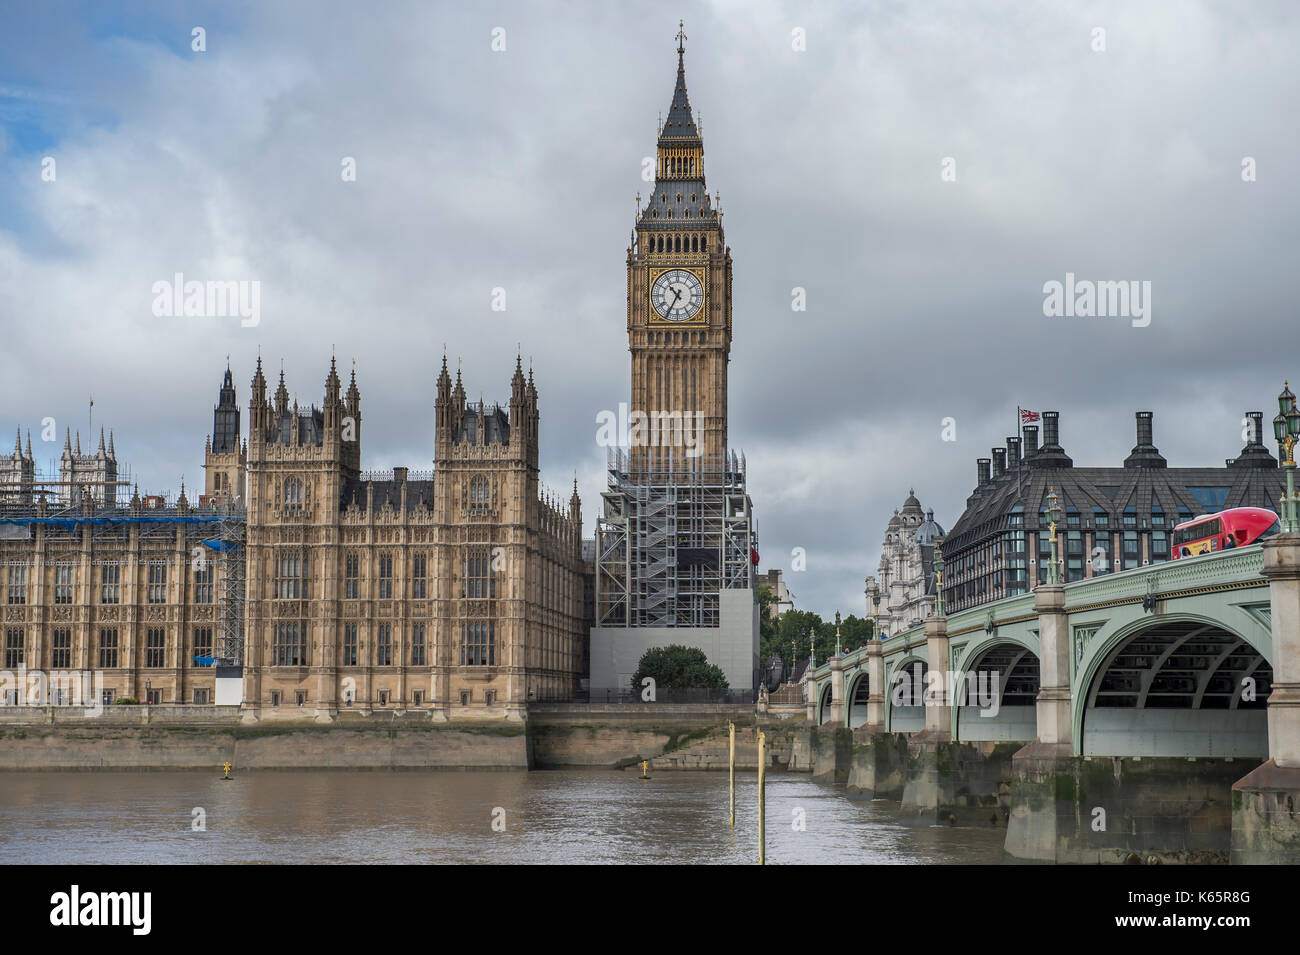 Scaffolding around the Houses of Parliament in London for essential repairs to Big Ben in the Elizabeth Tower, September 2017. Stock Photo